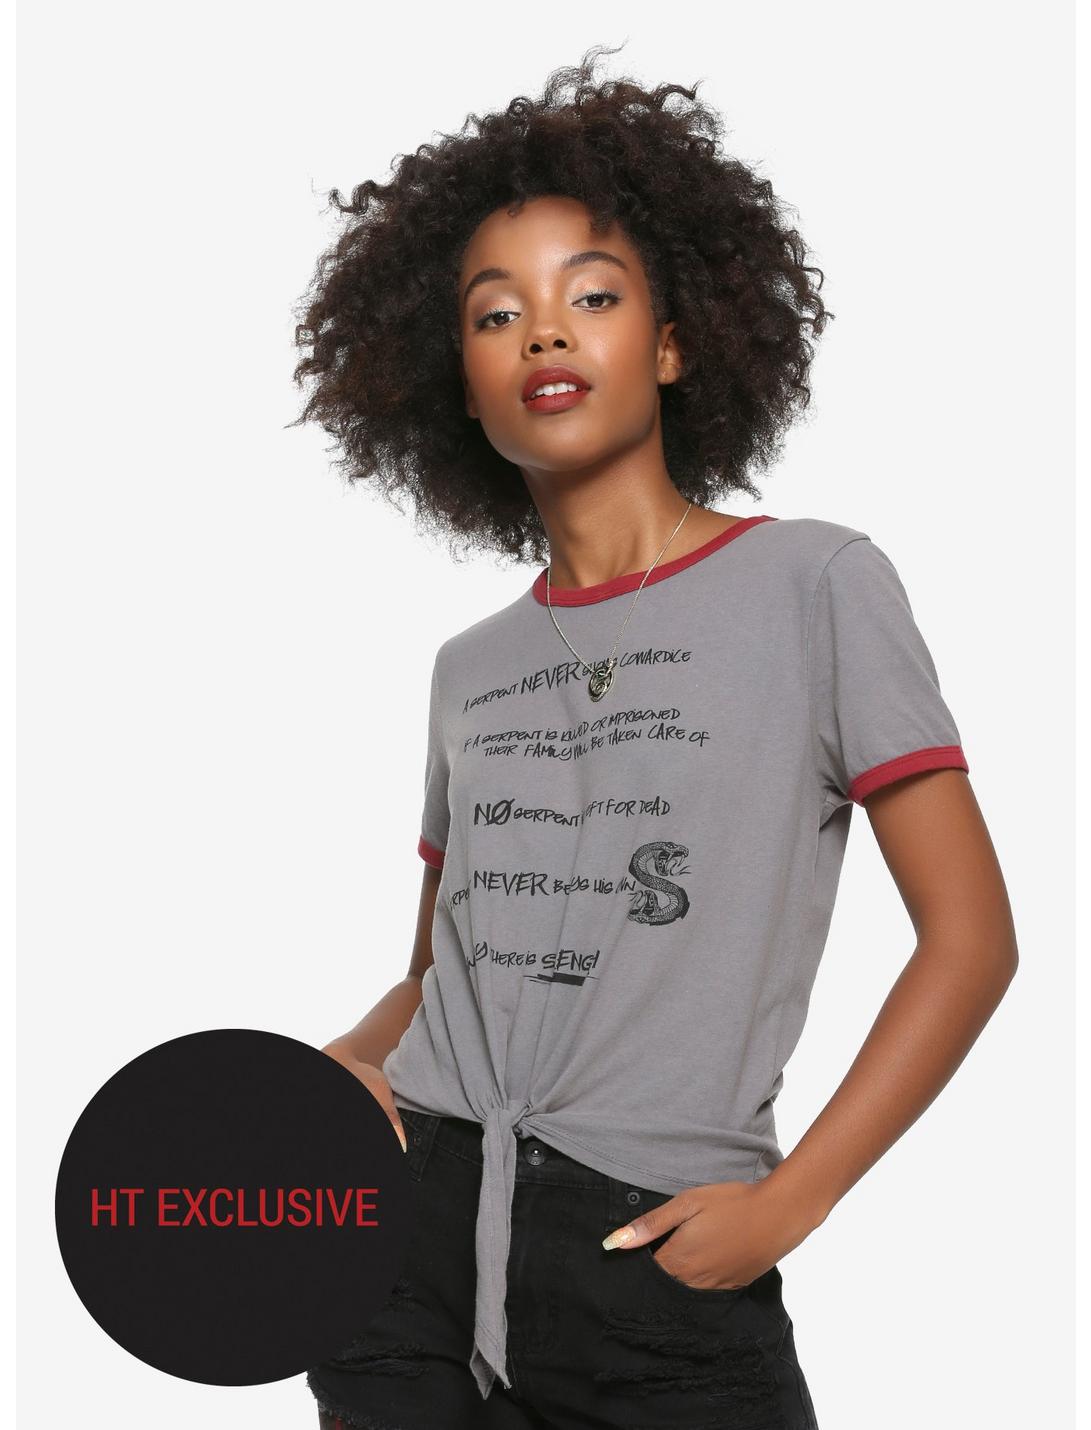 Riverdale Toni Serpent's Rules Tie Front Girls T-Shirt Hot Topic Exclusive, BLACK, hi-res